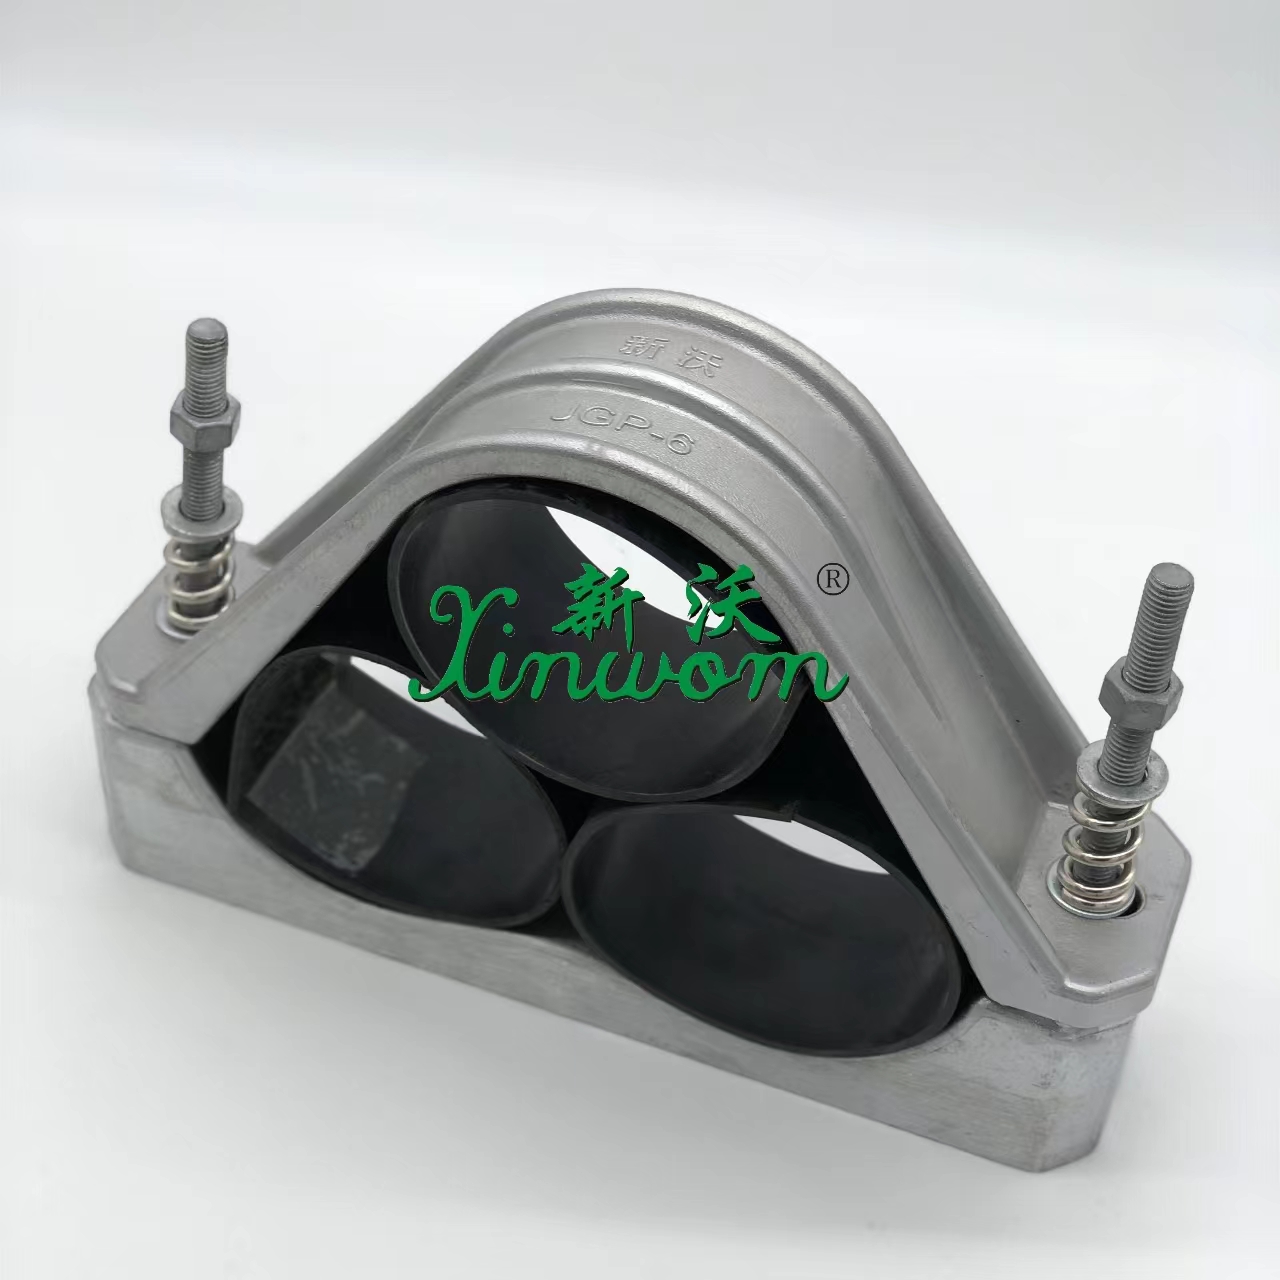 JGP High voltage cable cleat Accept customization